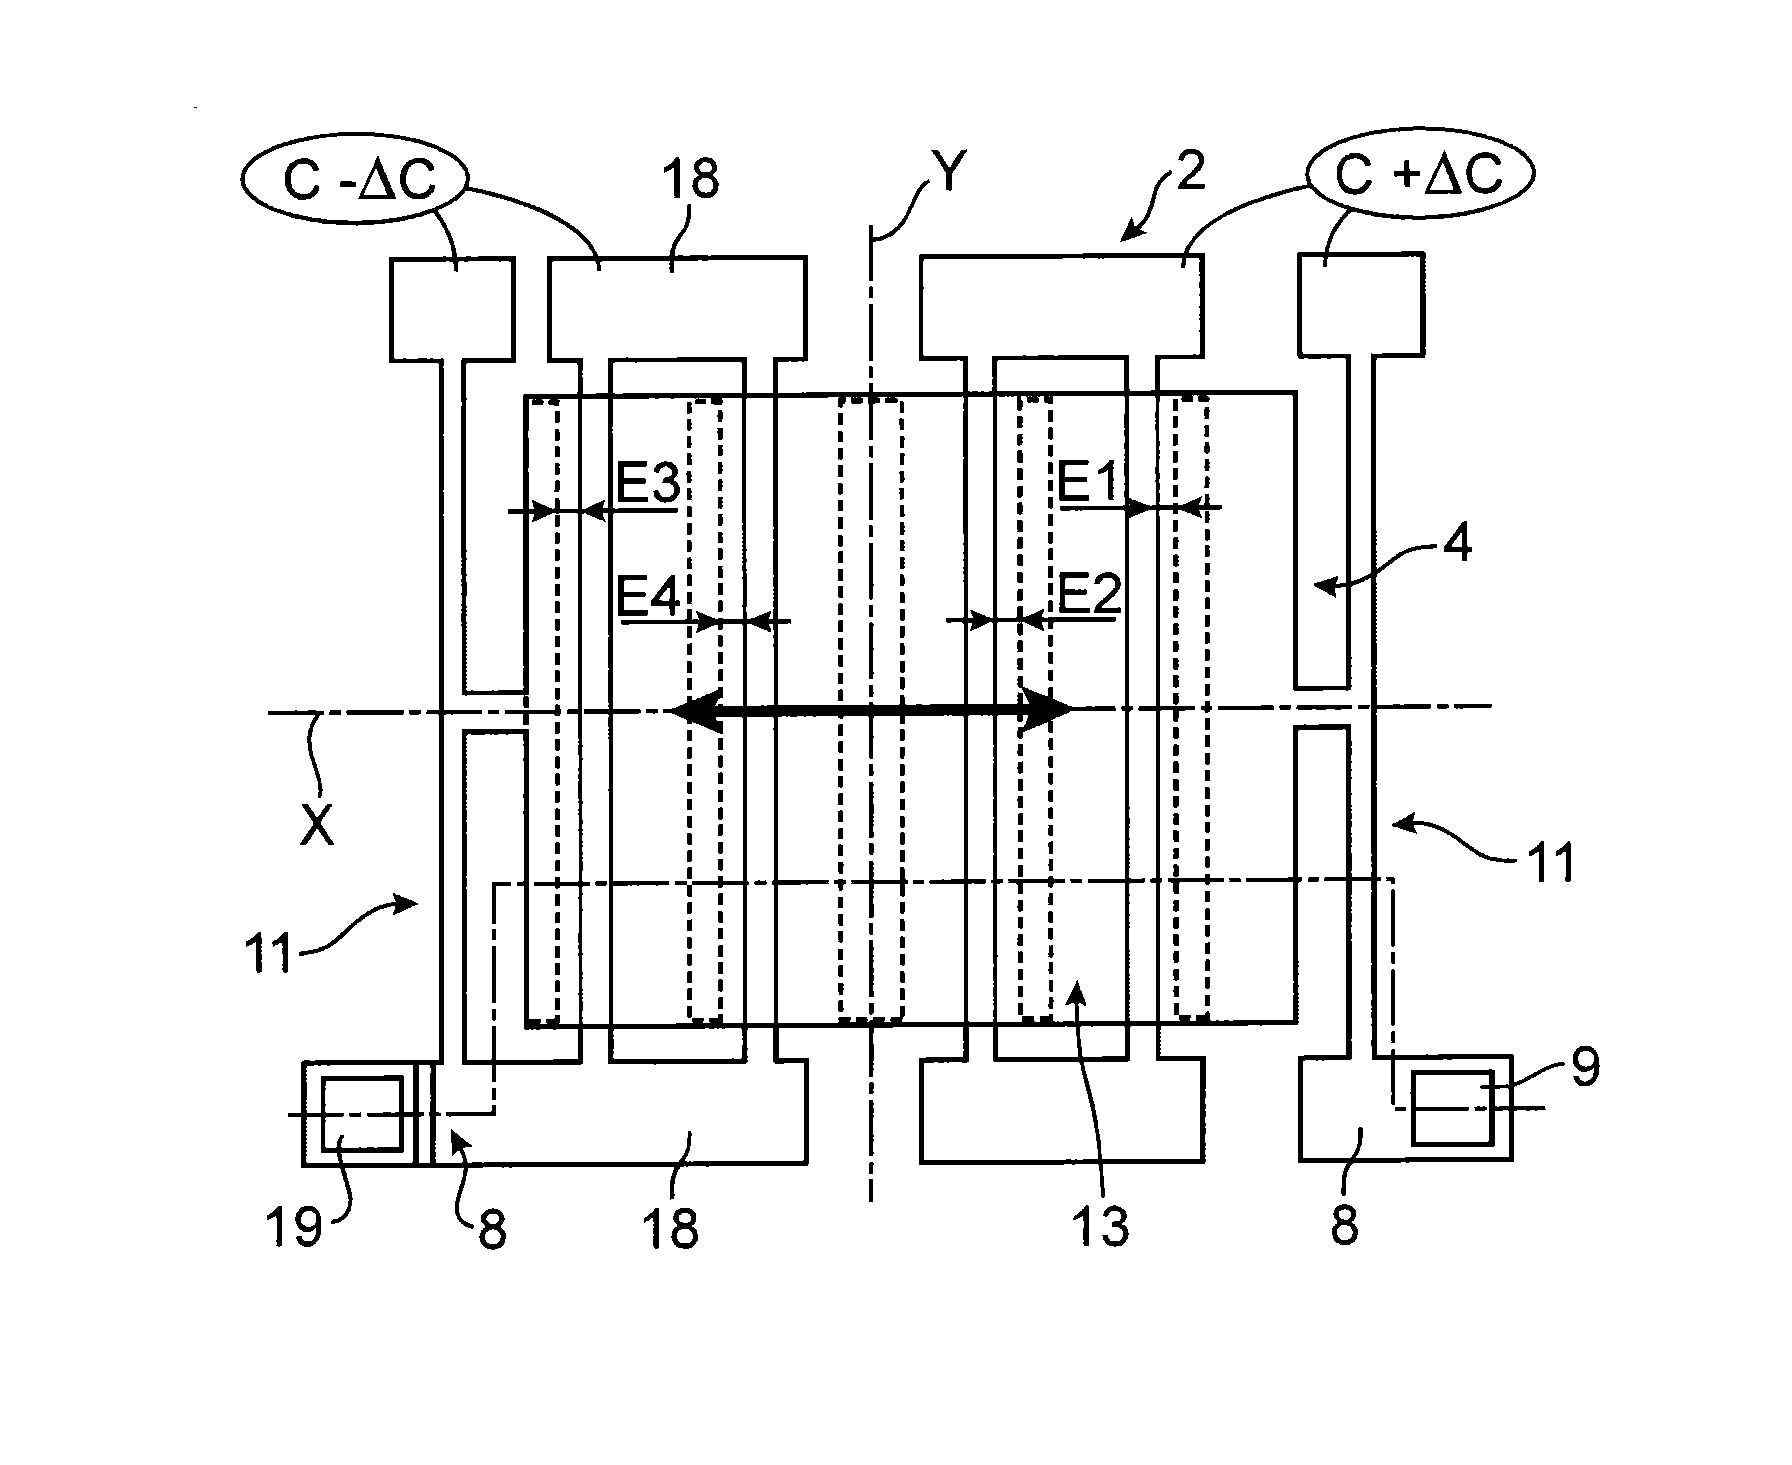 Capacitive microelectronic and/or nanoelectronic device with increased compactness